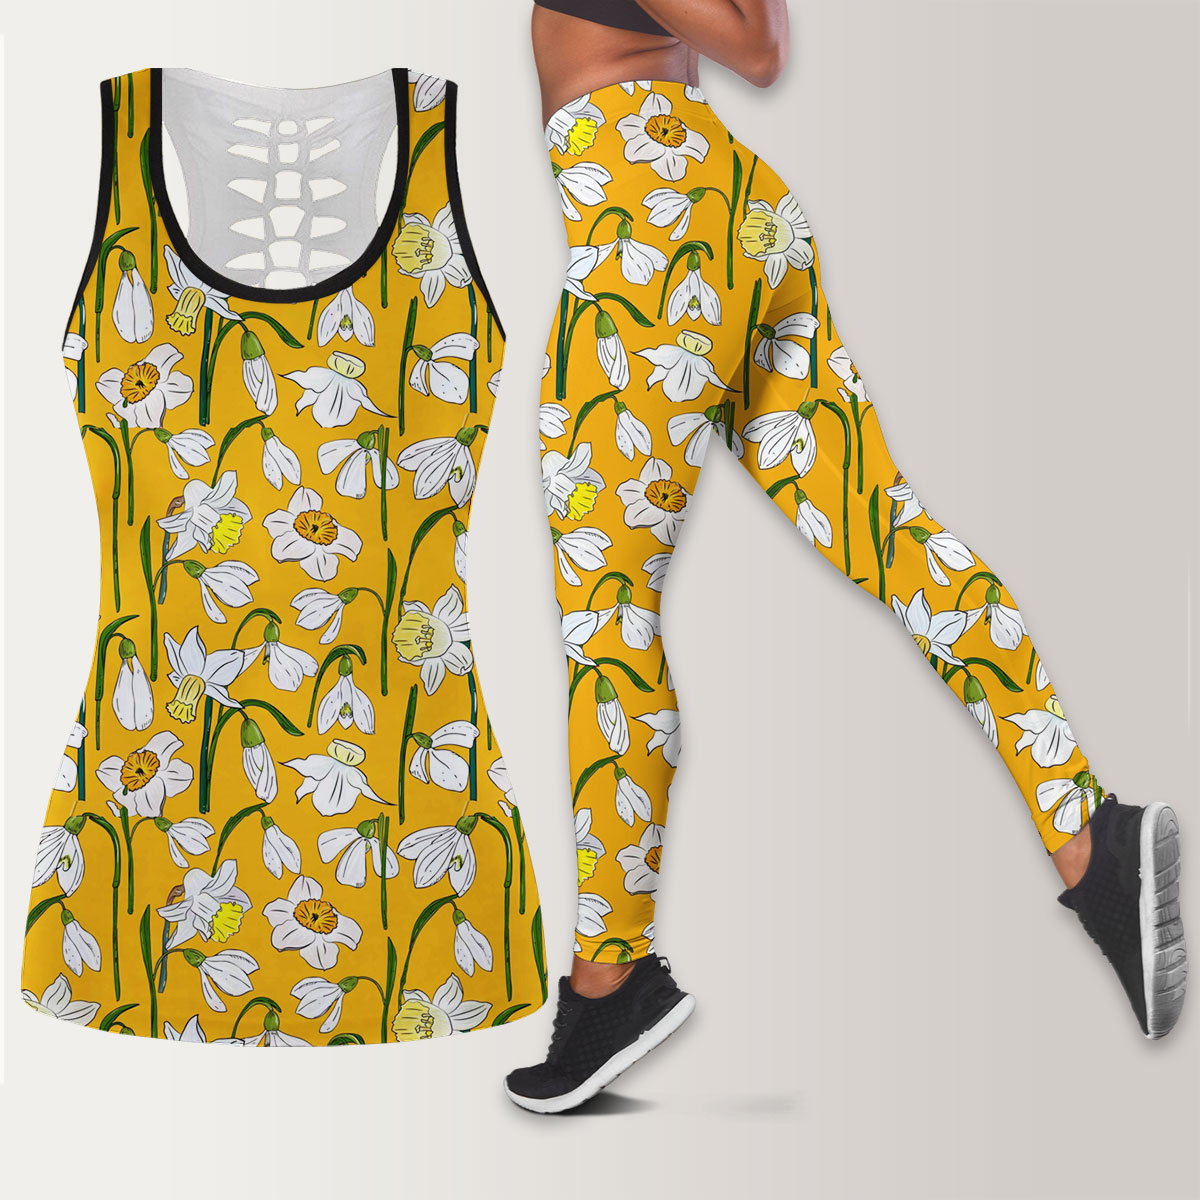 Snowdrops And Daffodils Seamless Pattern Legging Tank Top set